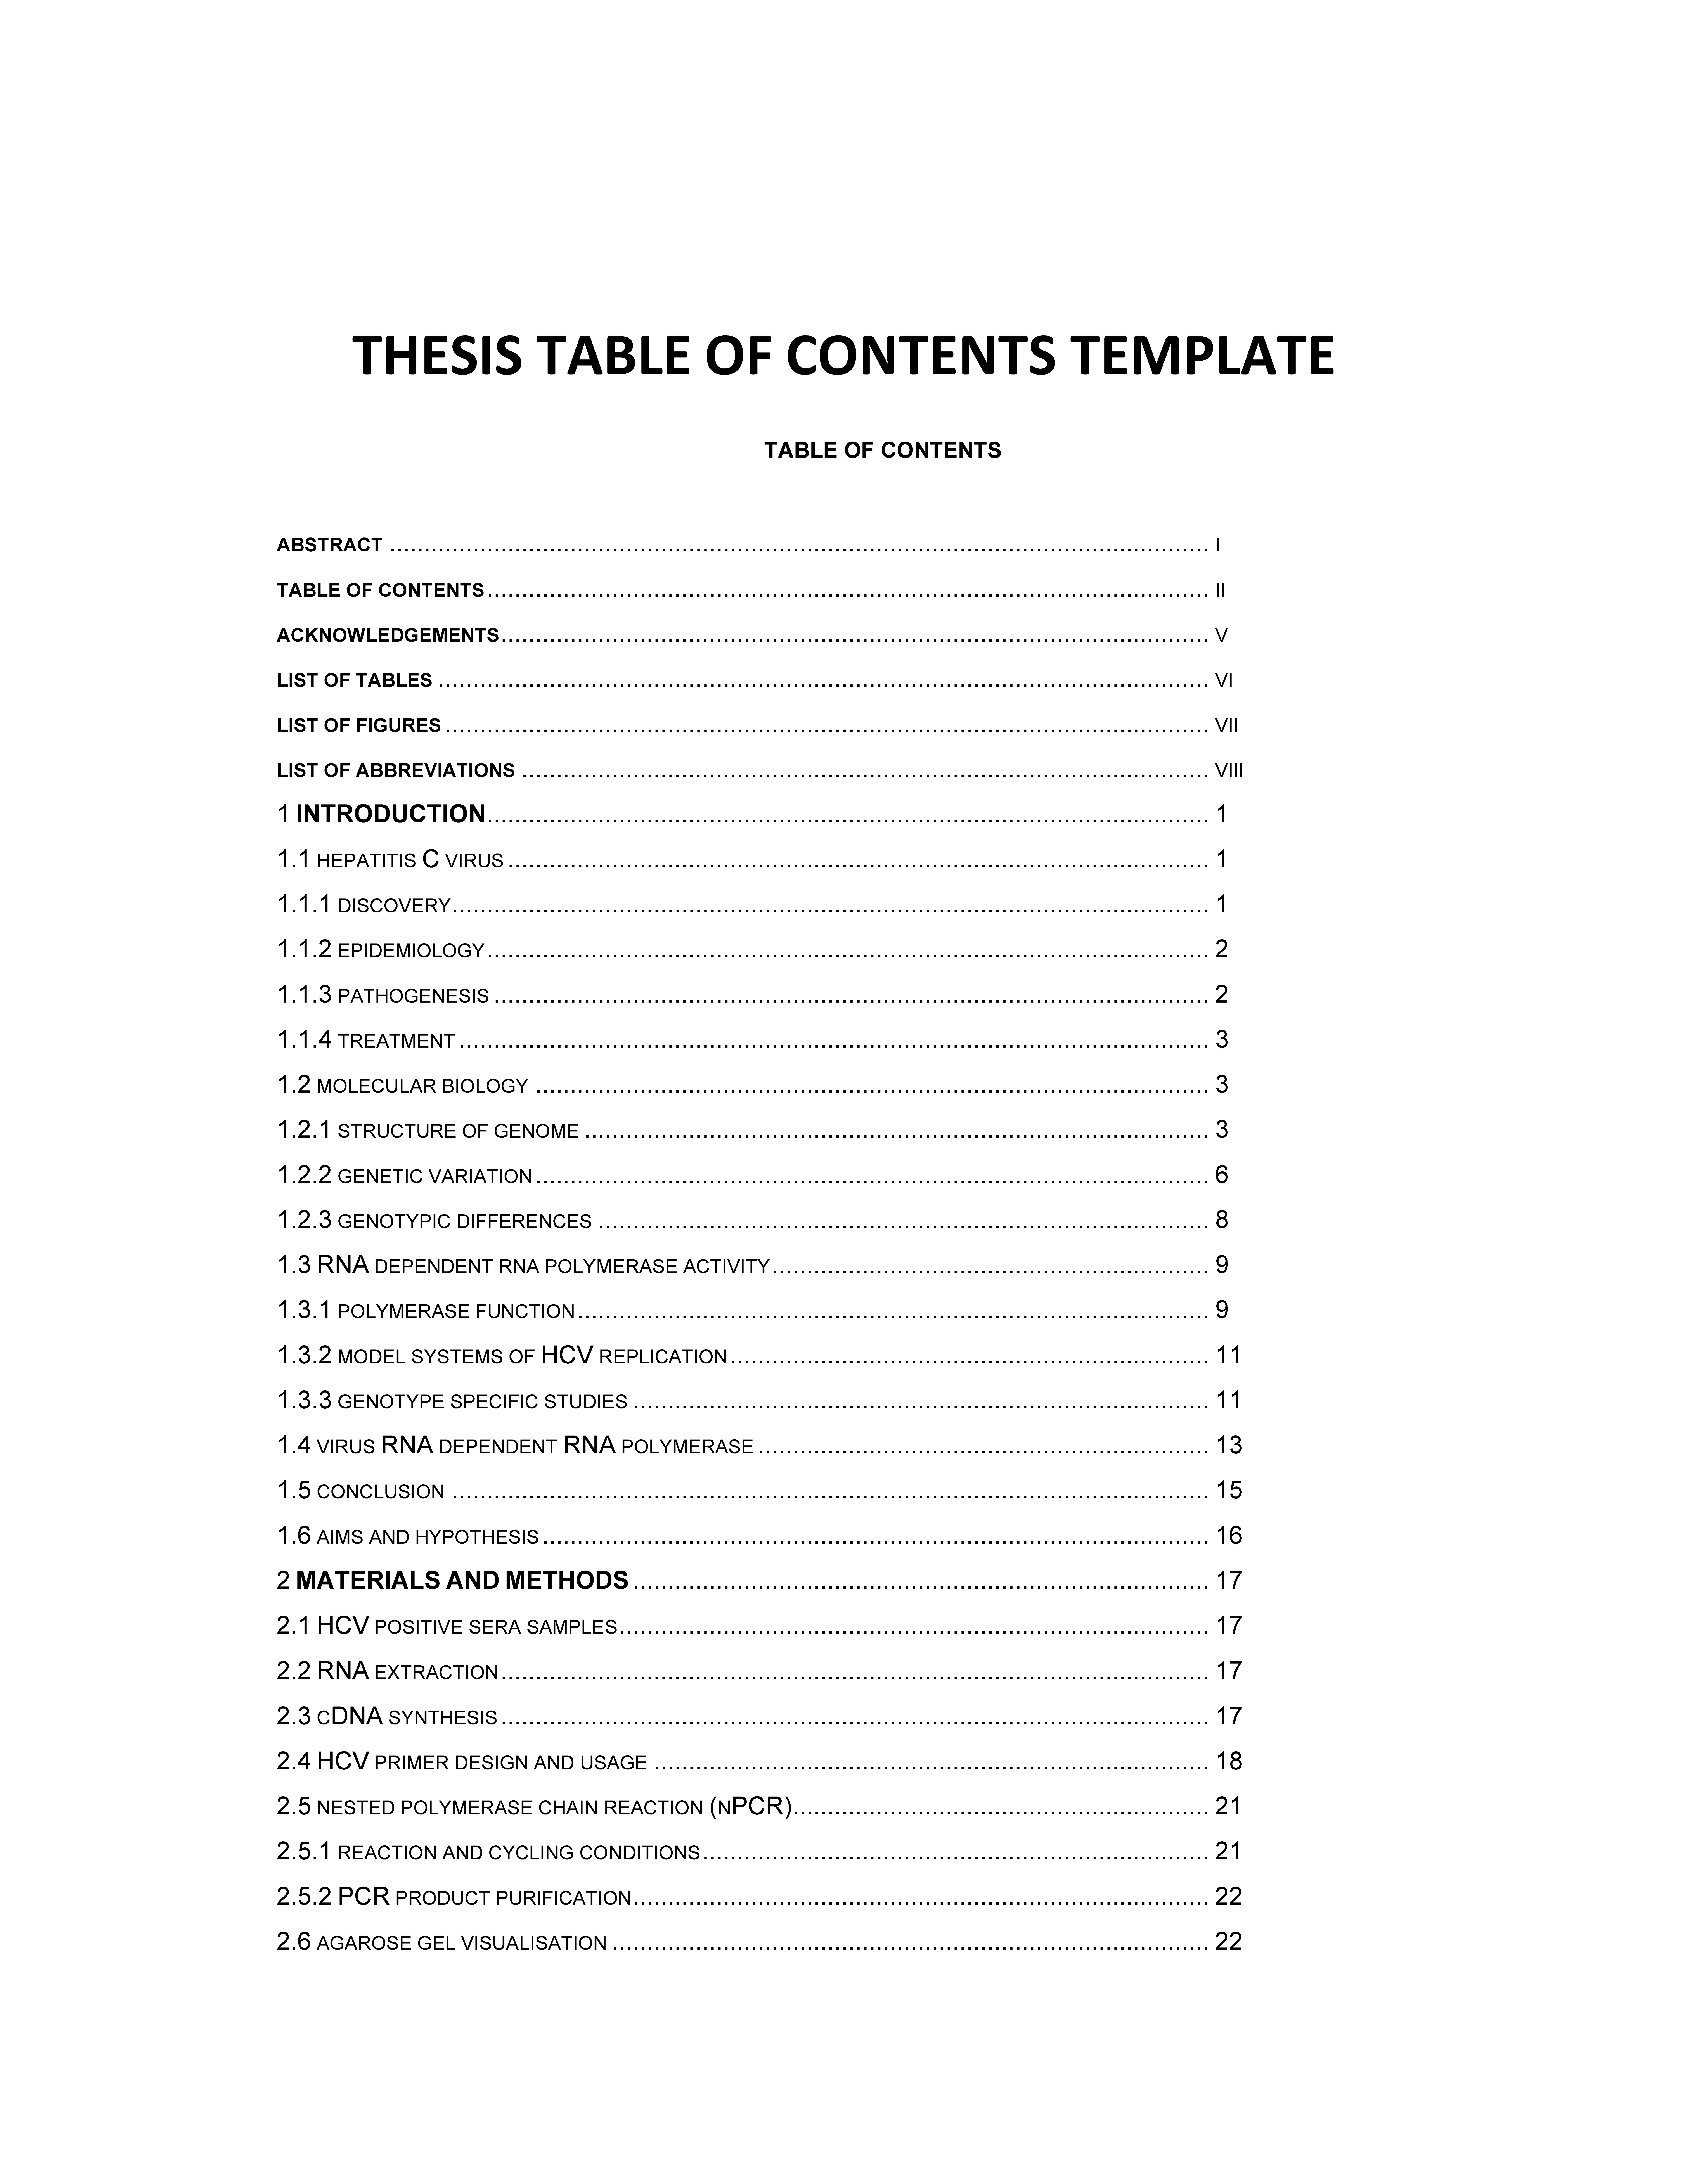 thesis table of contents template modèles